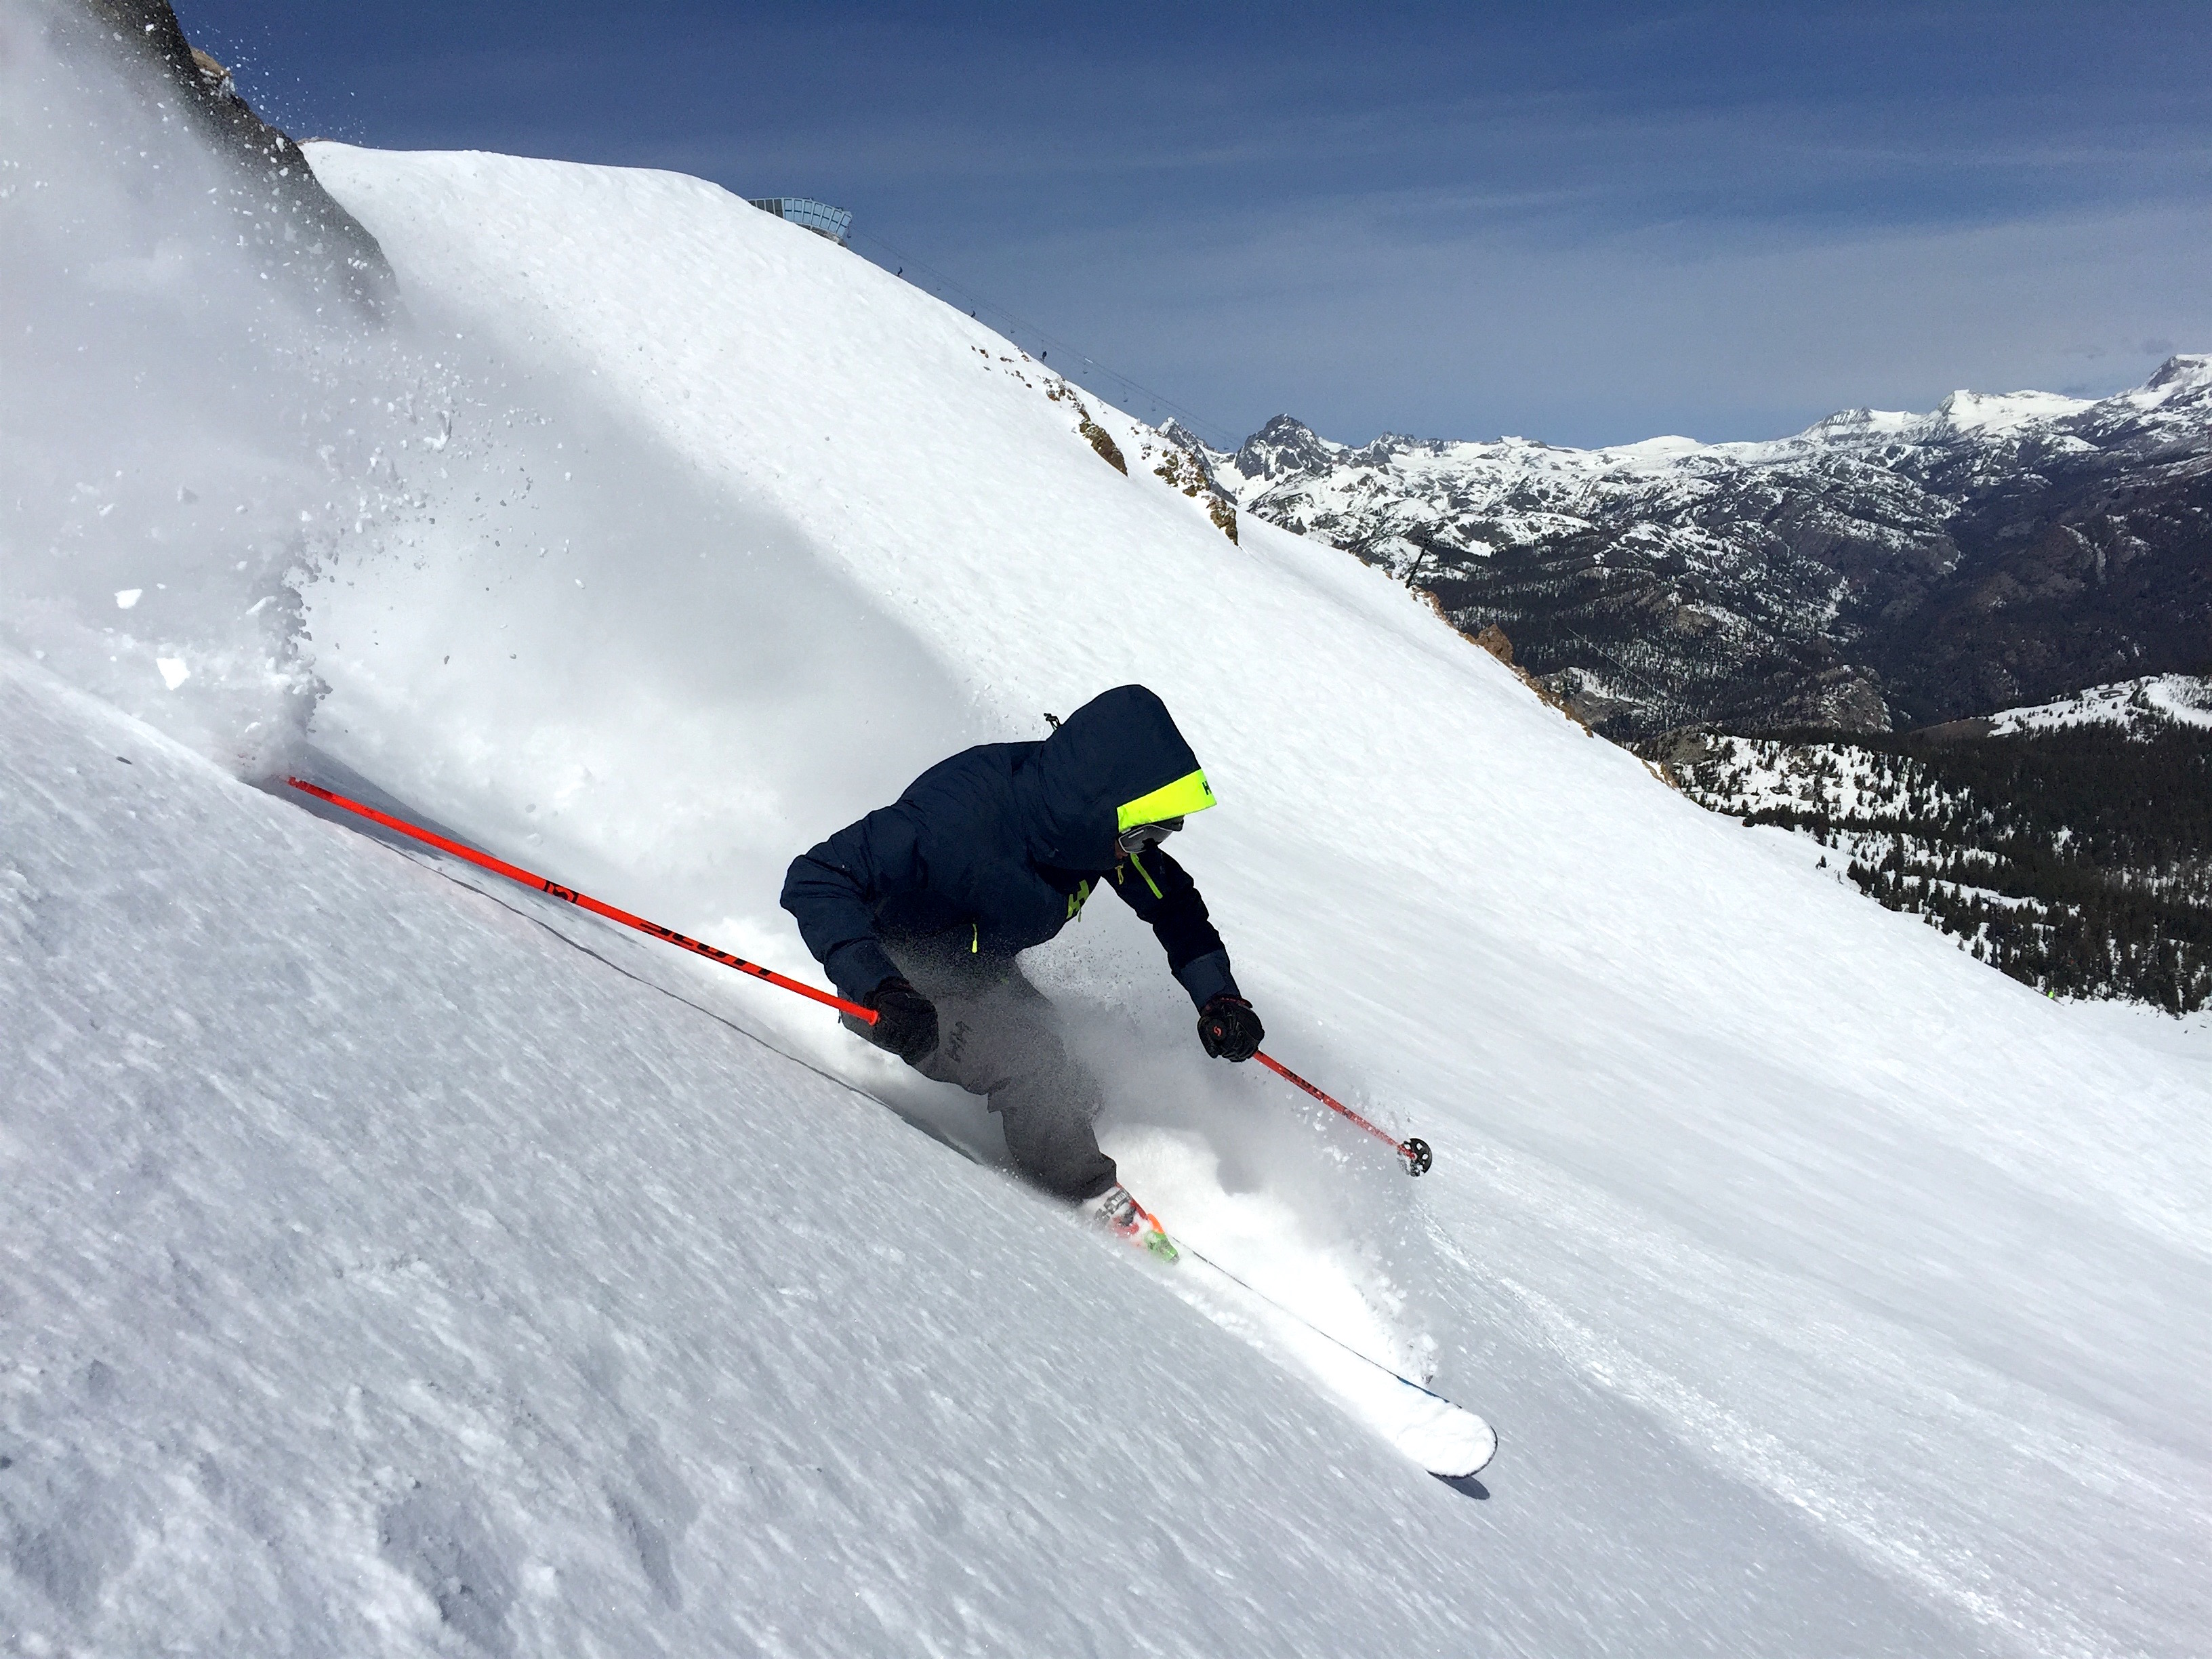 Miles in the perfect snow in lower Hangman's on April 29th. photo: snowbrains